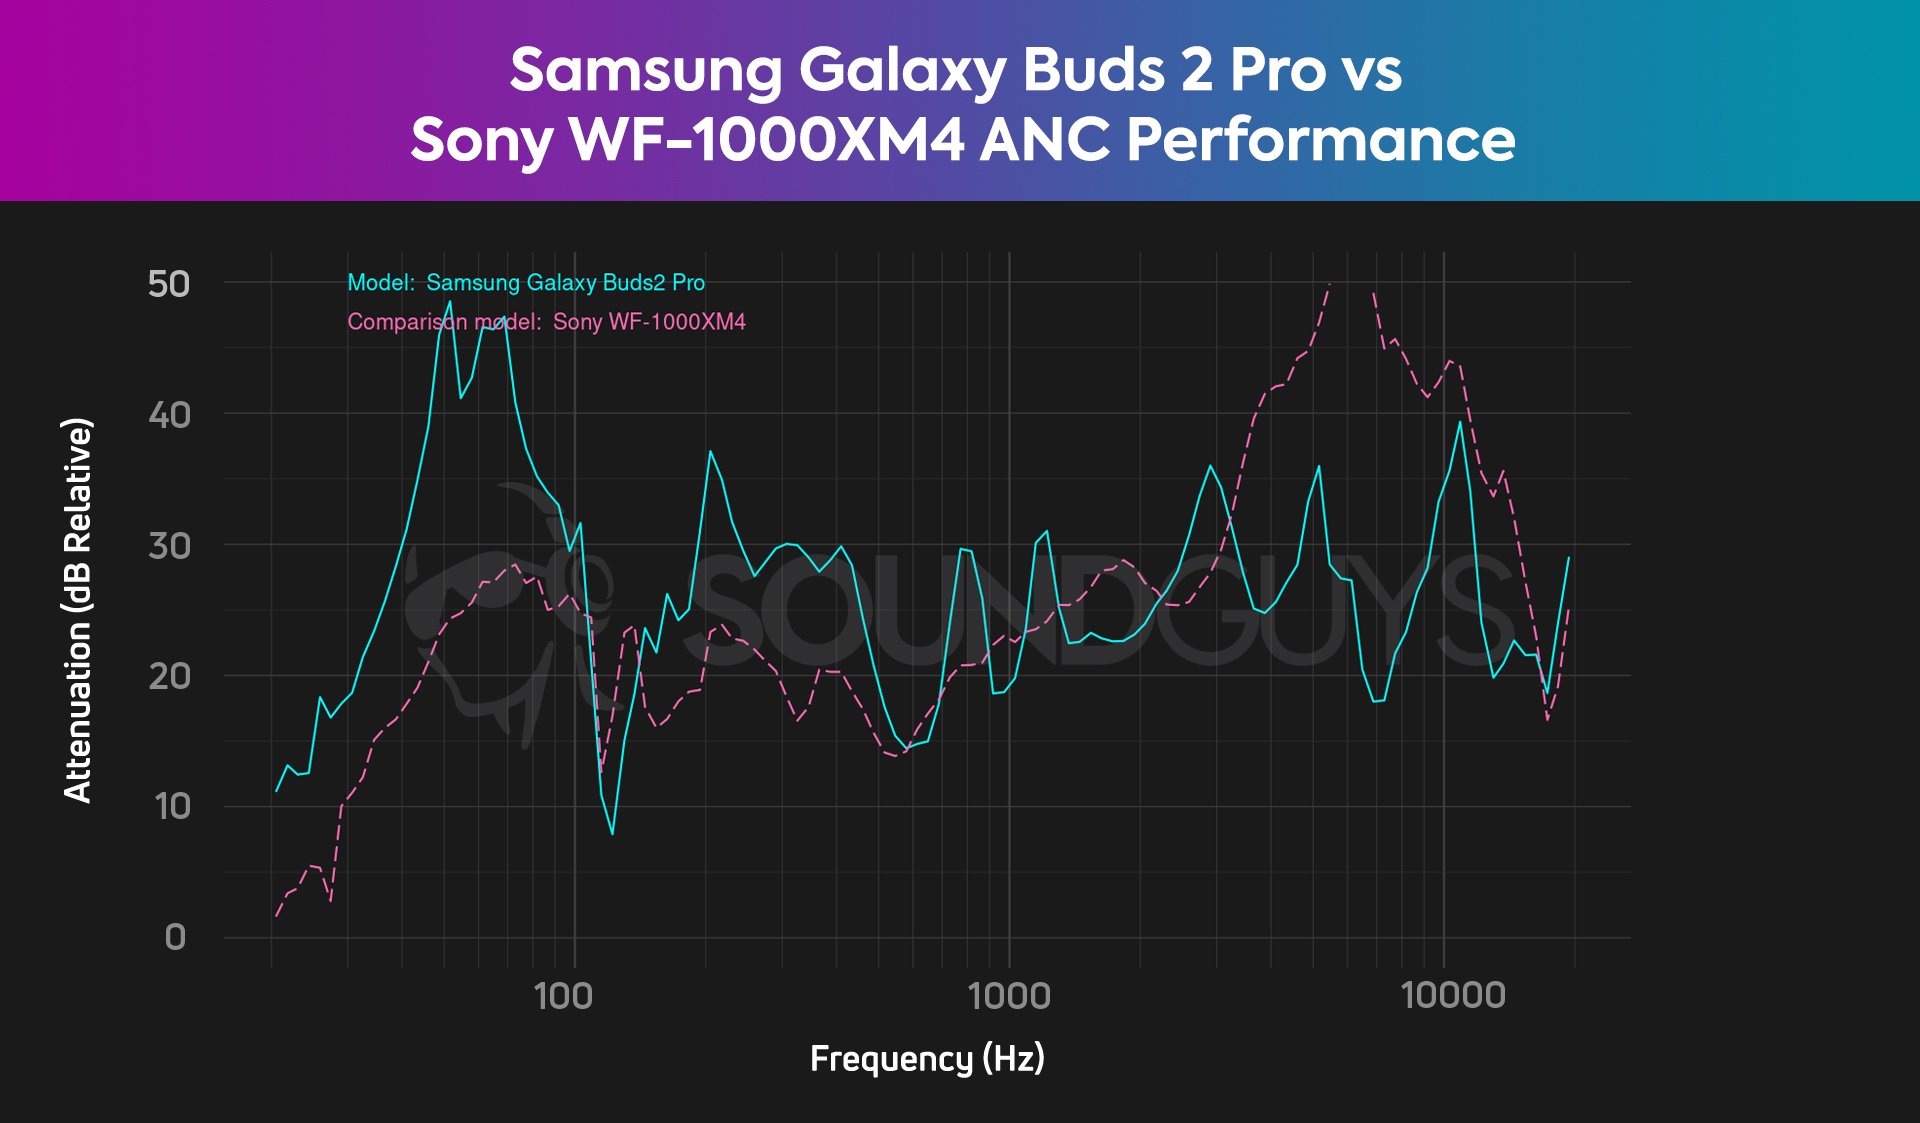 Noise canceling comparison chart for the Samsung Galaxy Buds 2 Pro and the Sony WF-1000XM4, showing better noise canceling in the low end from the Samsung earbuds, but Sony does better in the high end.